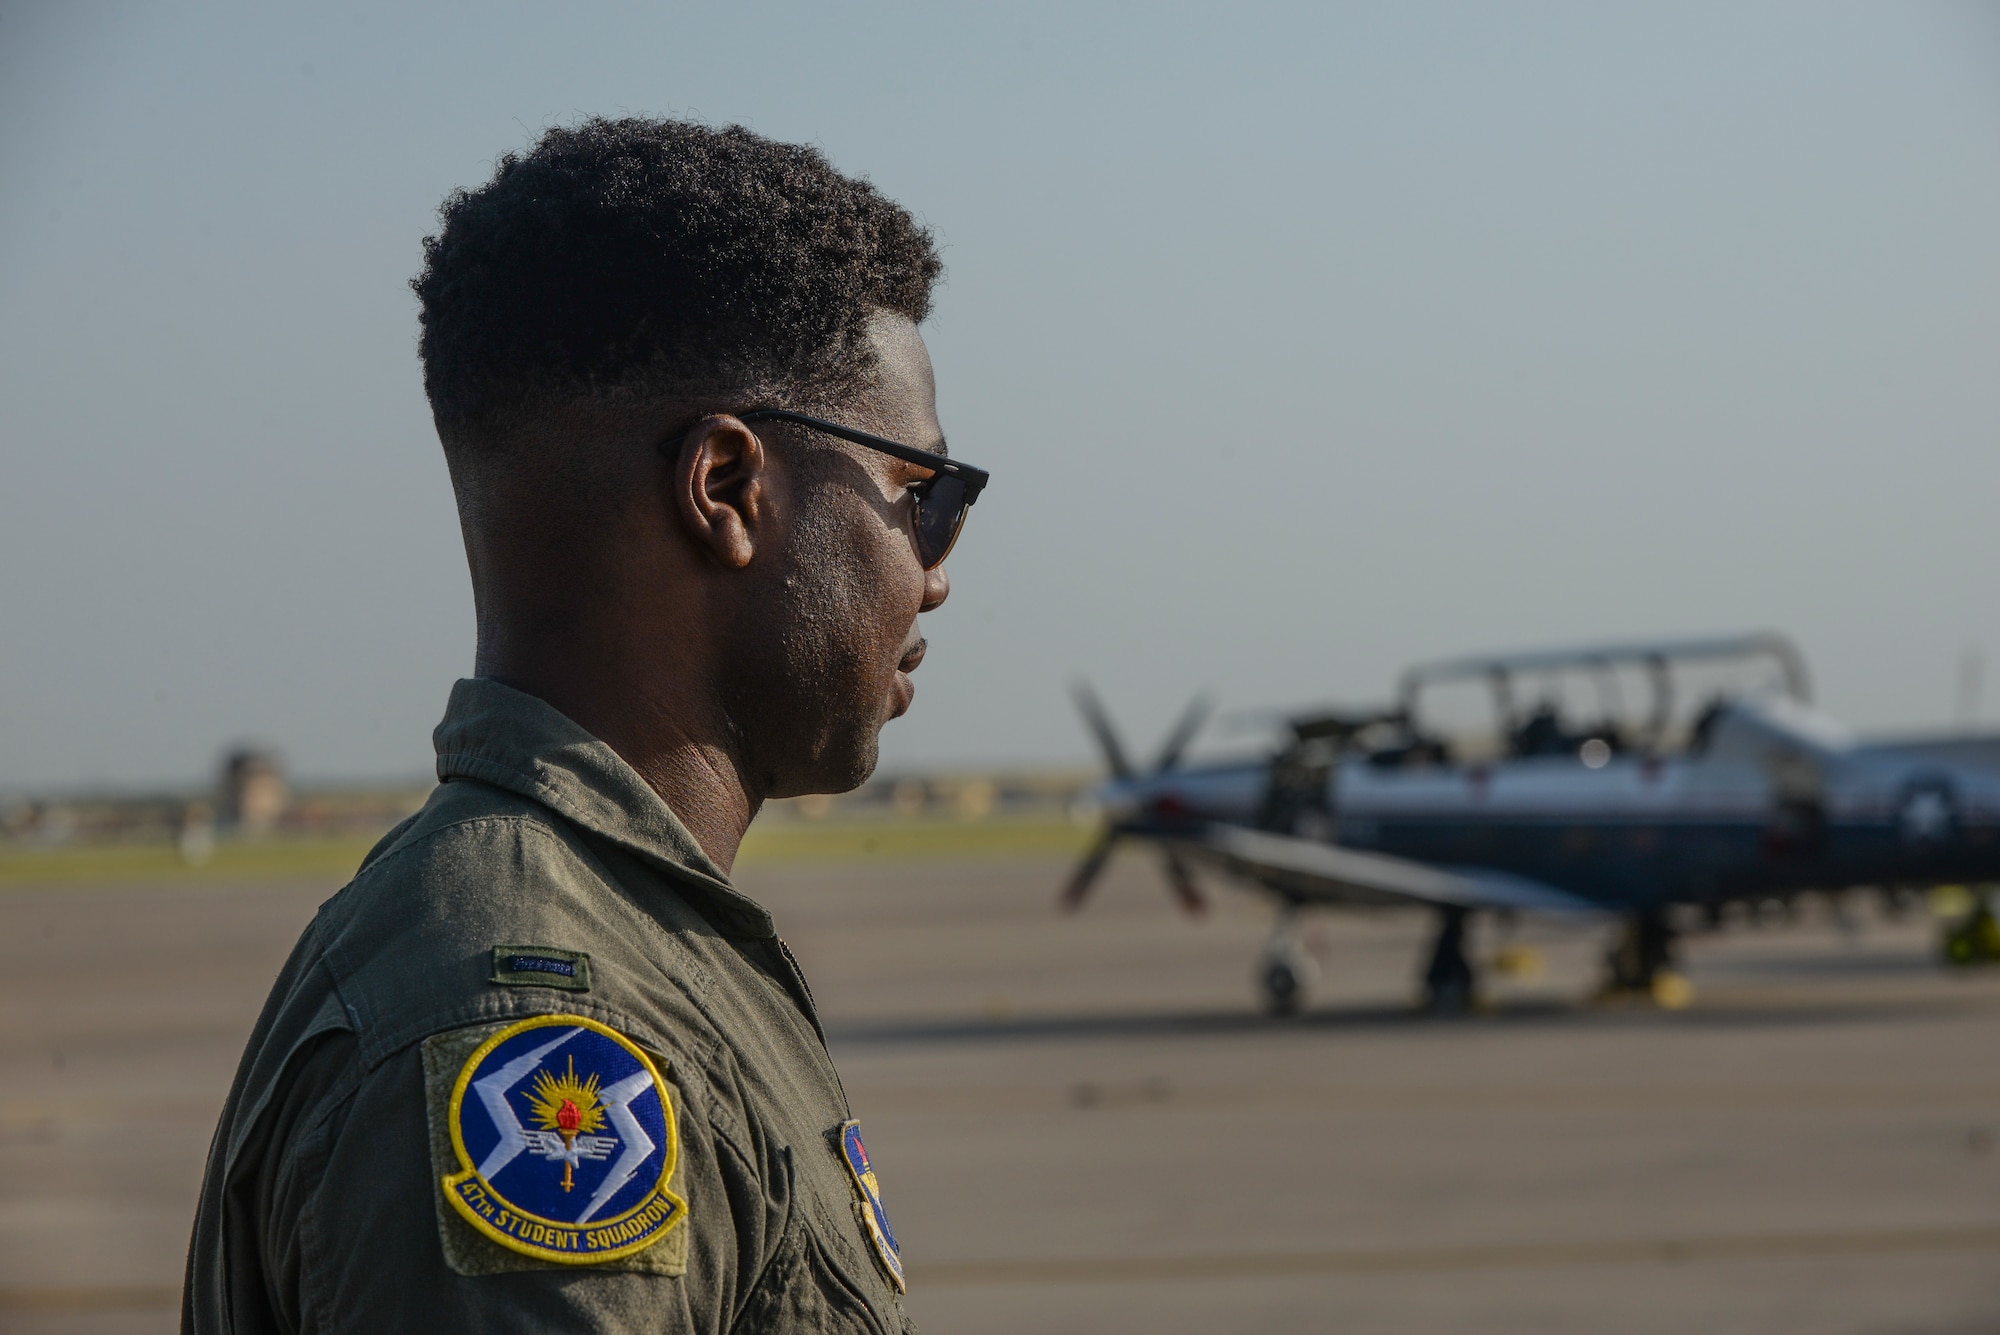 47th Flying Training Wing Class 19-17 graduate and Order of Daedalians AETC Commander’s Trophy recipient, 1st Lt. Tyler Weaver, glances at the T-6 fleet, an aircraft he initially flew during Phase II of pilot training at Laughlin Air Force Base, Texas, July 31, 2019. During each phase of pilot training, students are expected to study, work collaboratively, and seek mentorship from their instructors and senior rated commanders. U.S. Air Force photo by Capt. Mahalia Frost)